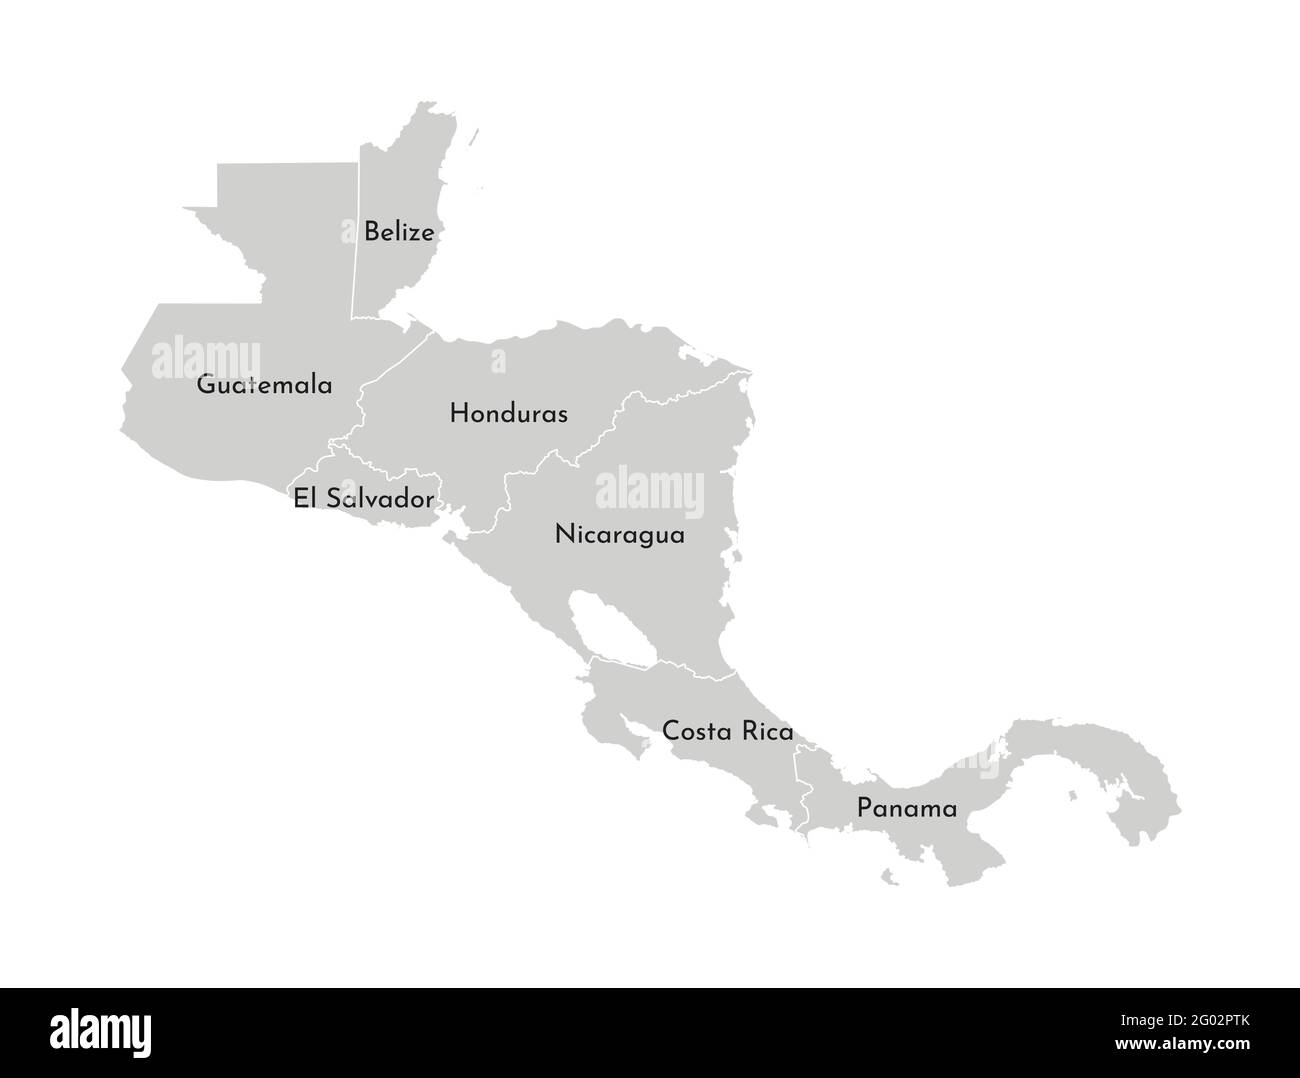 Vector illustration with simplified map of Central America region. Grey silhouettes, white outline of states' borders. Stock Vector